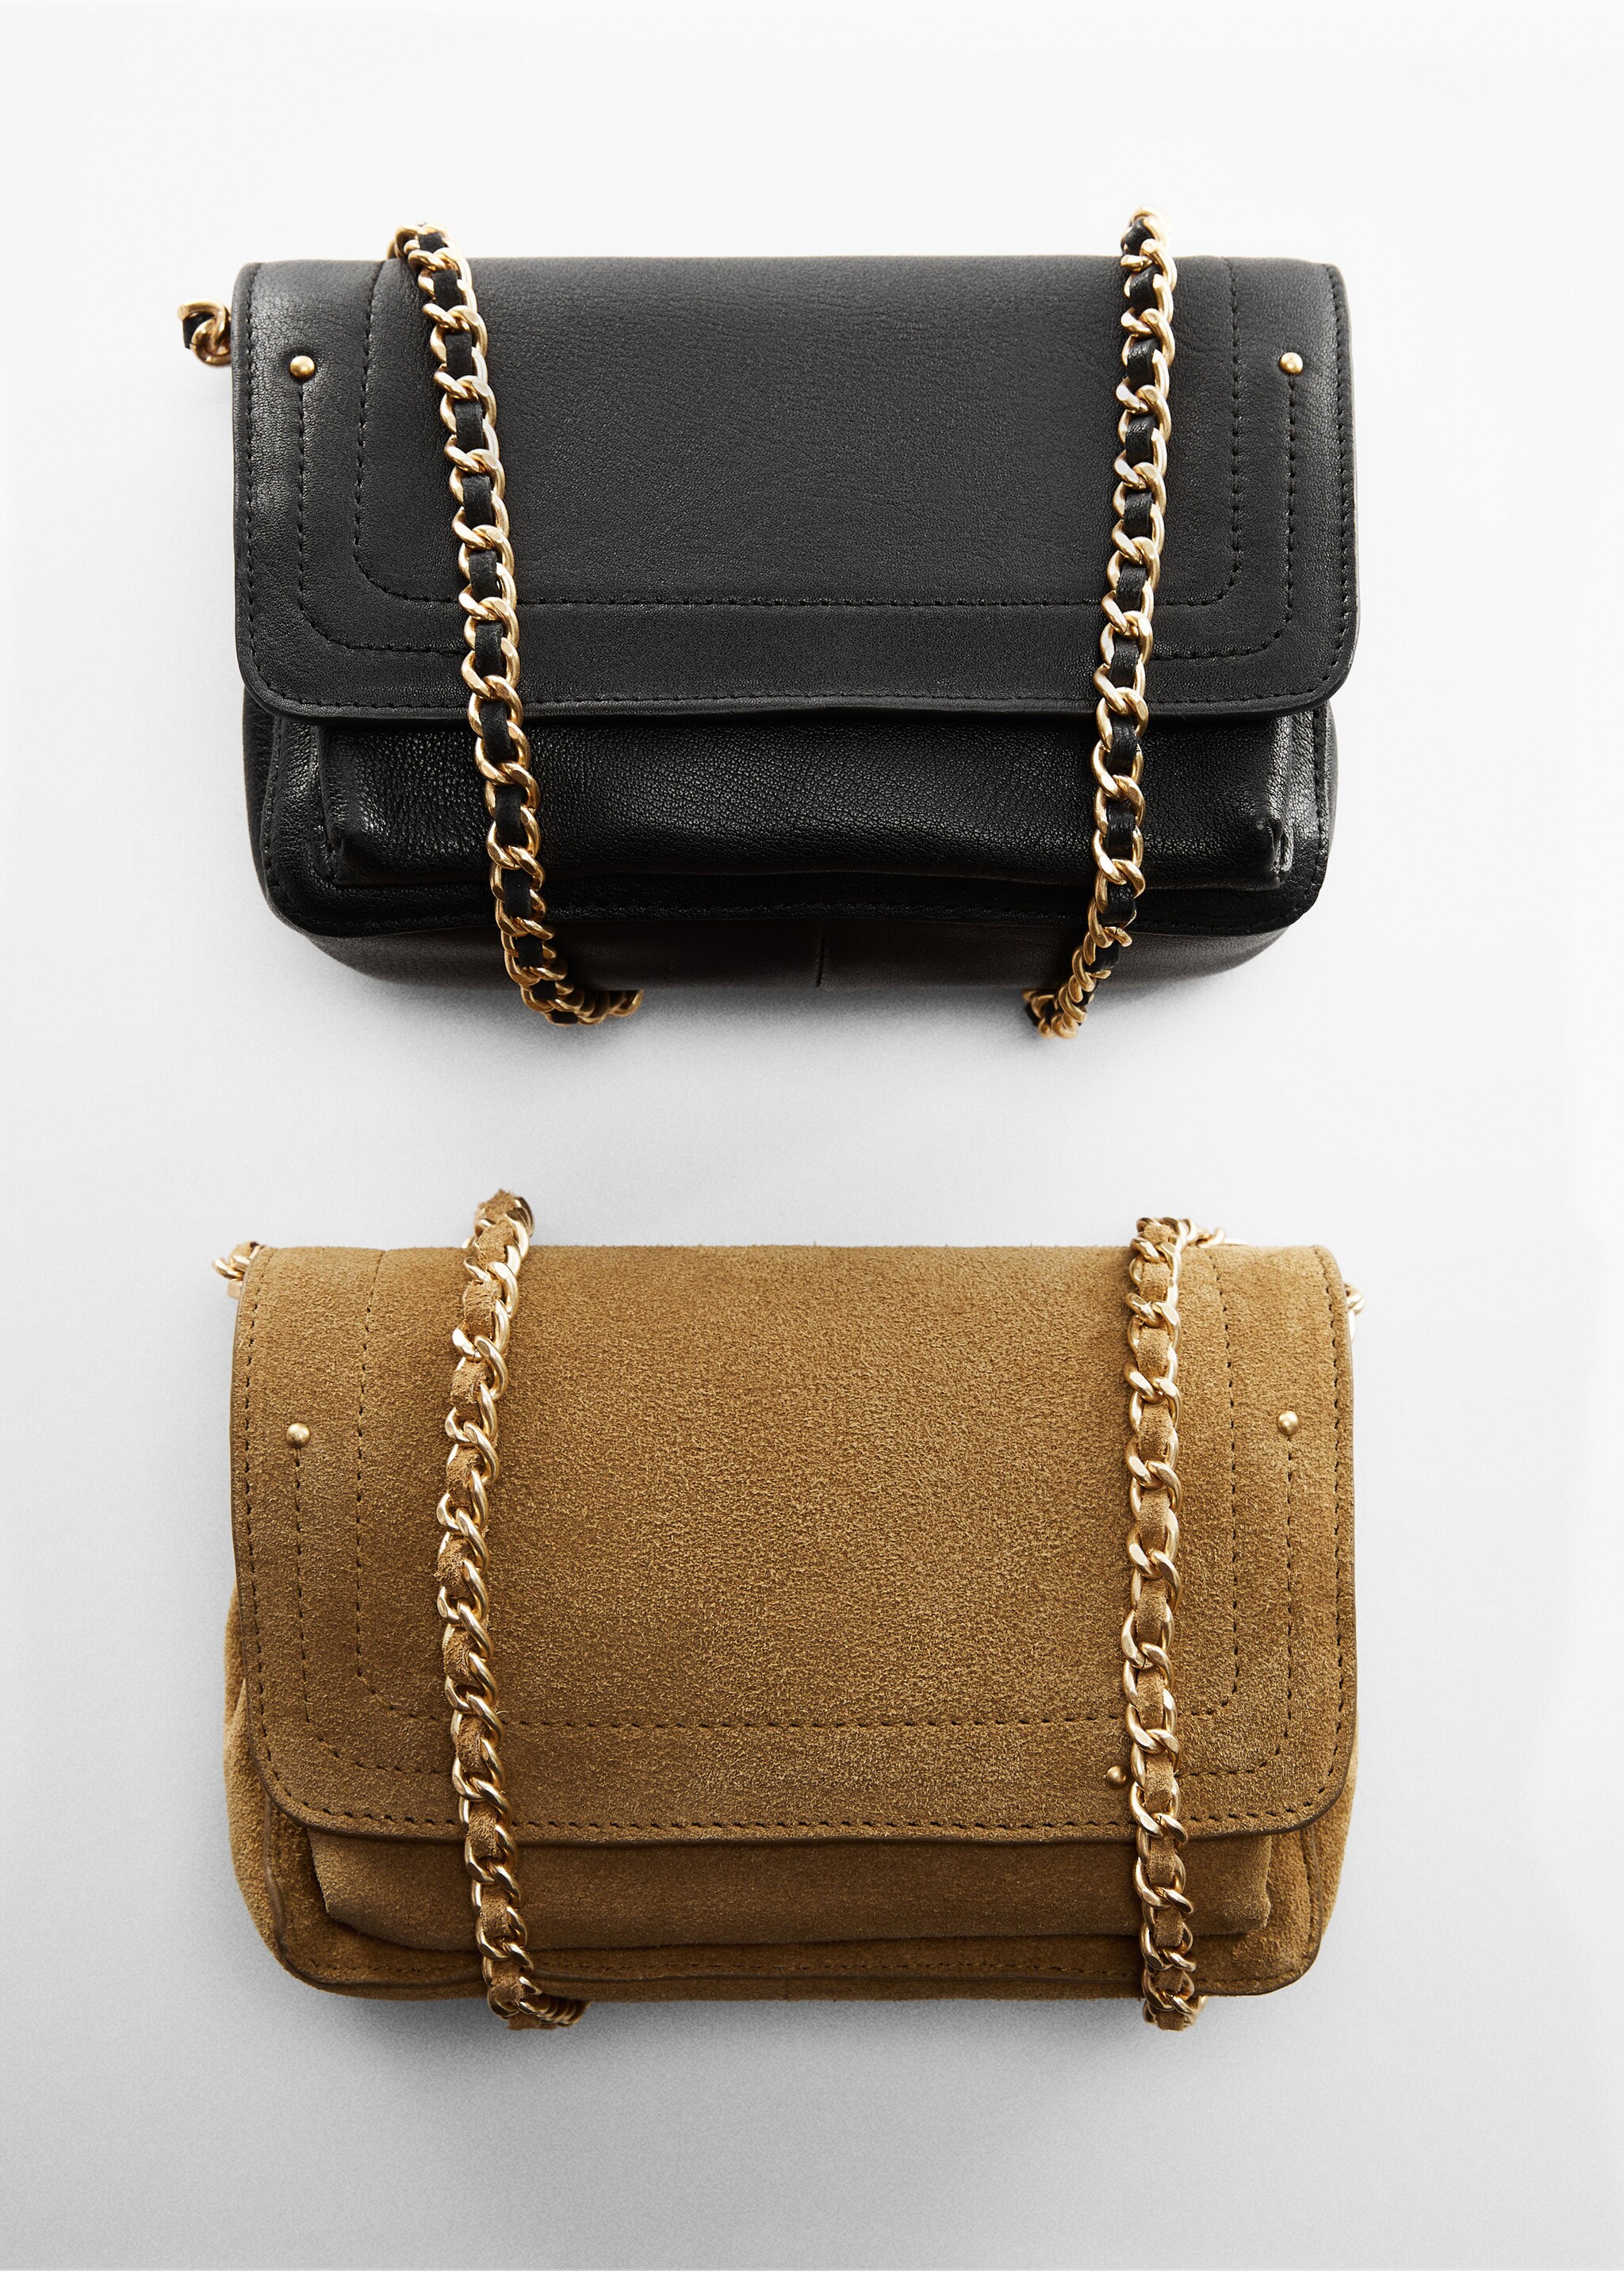 Flap leather bag - Details of the article 5